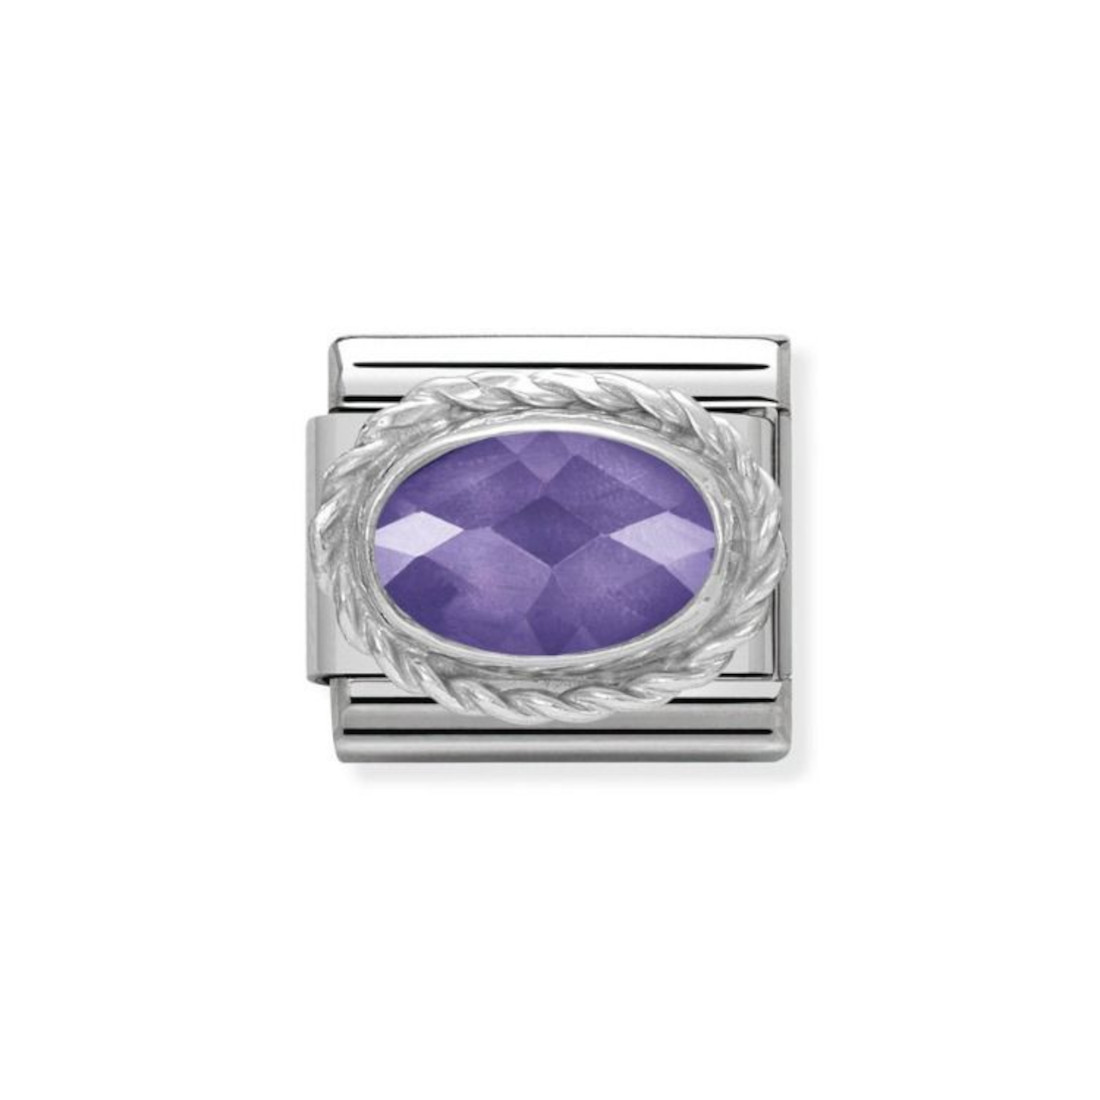 NOMINATION COMPOSABLE CLASSIC LINK IN STERLING SILVER WITH FACETED PURPLE STONE 330604/001